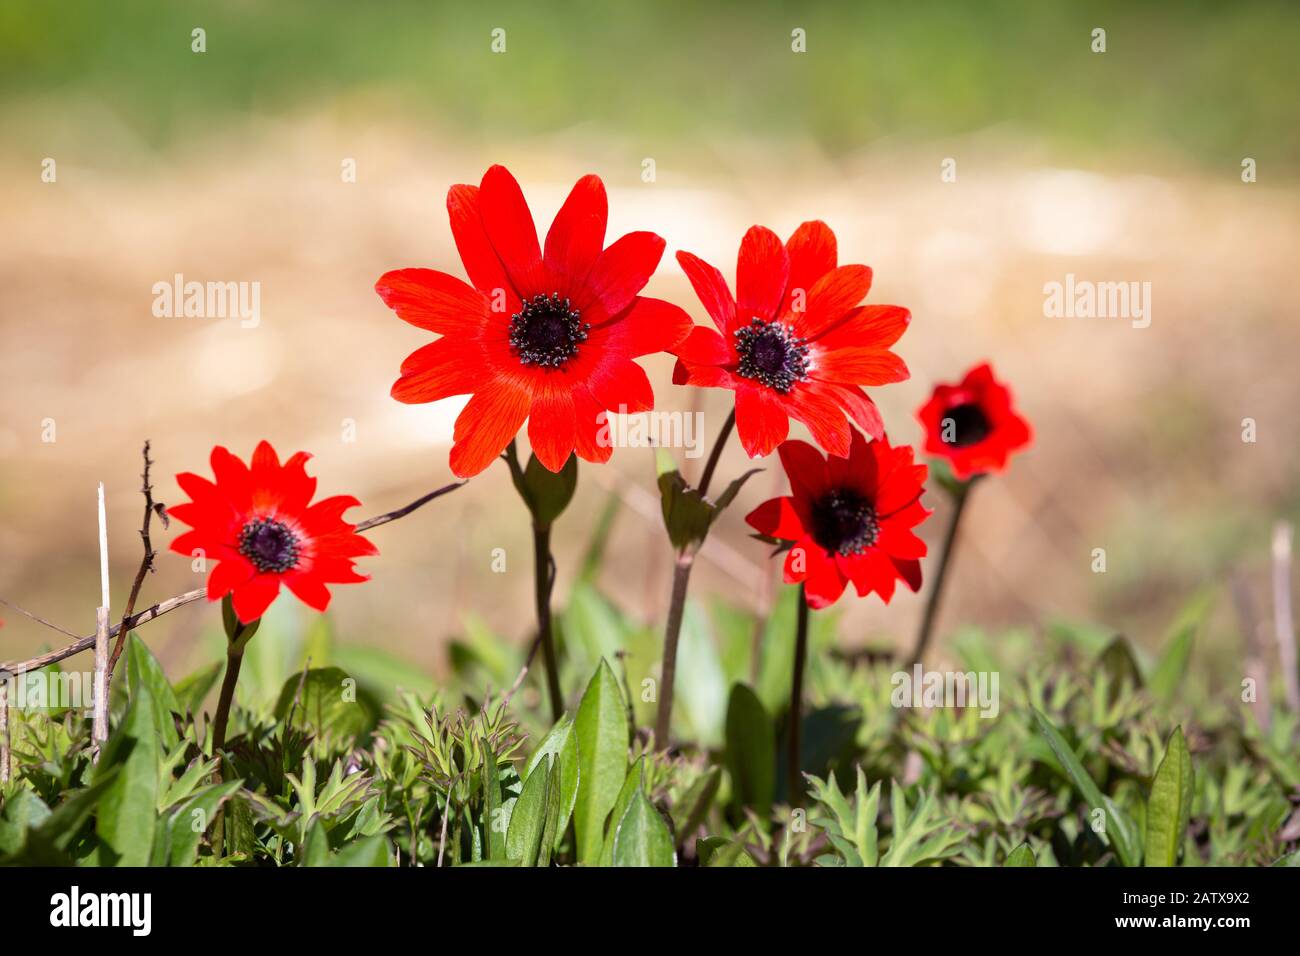 The spectacular, spring-flowering Anemone - Anemone Pavonina - with a blurry background. Stock Photo